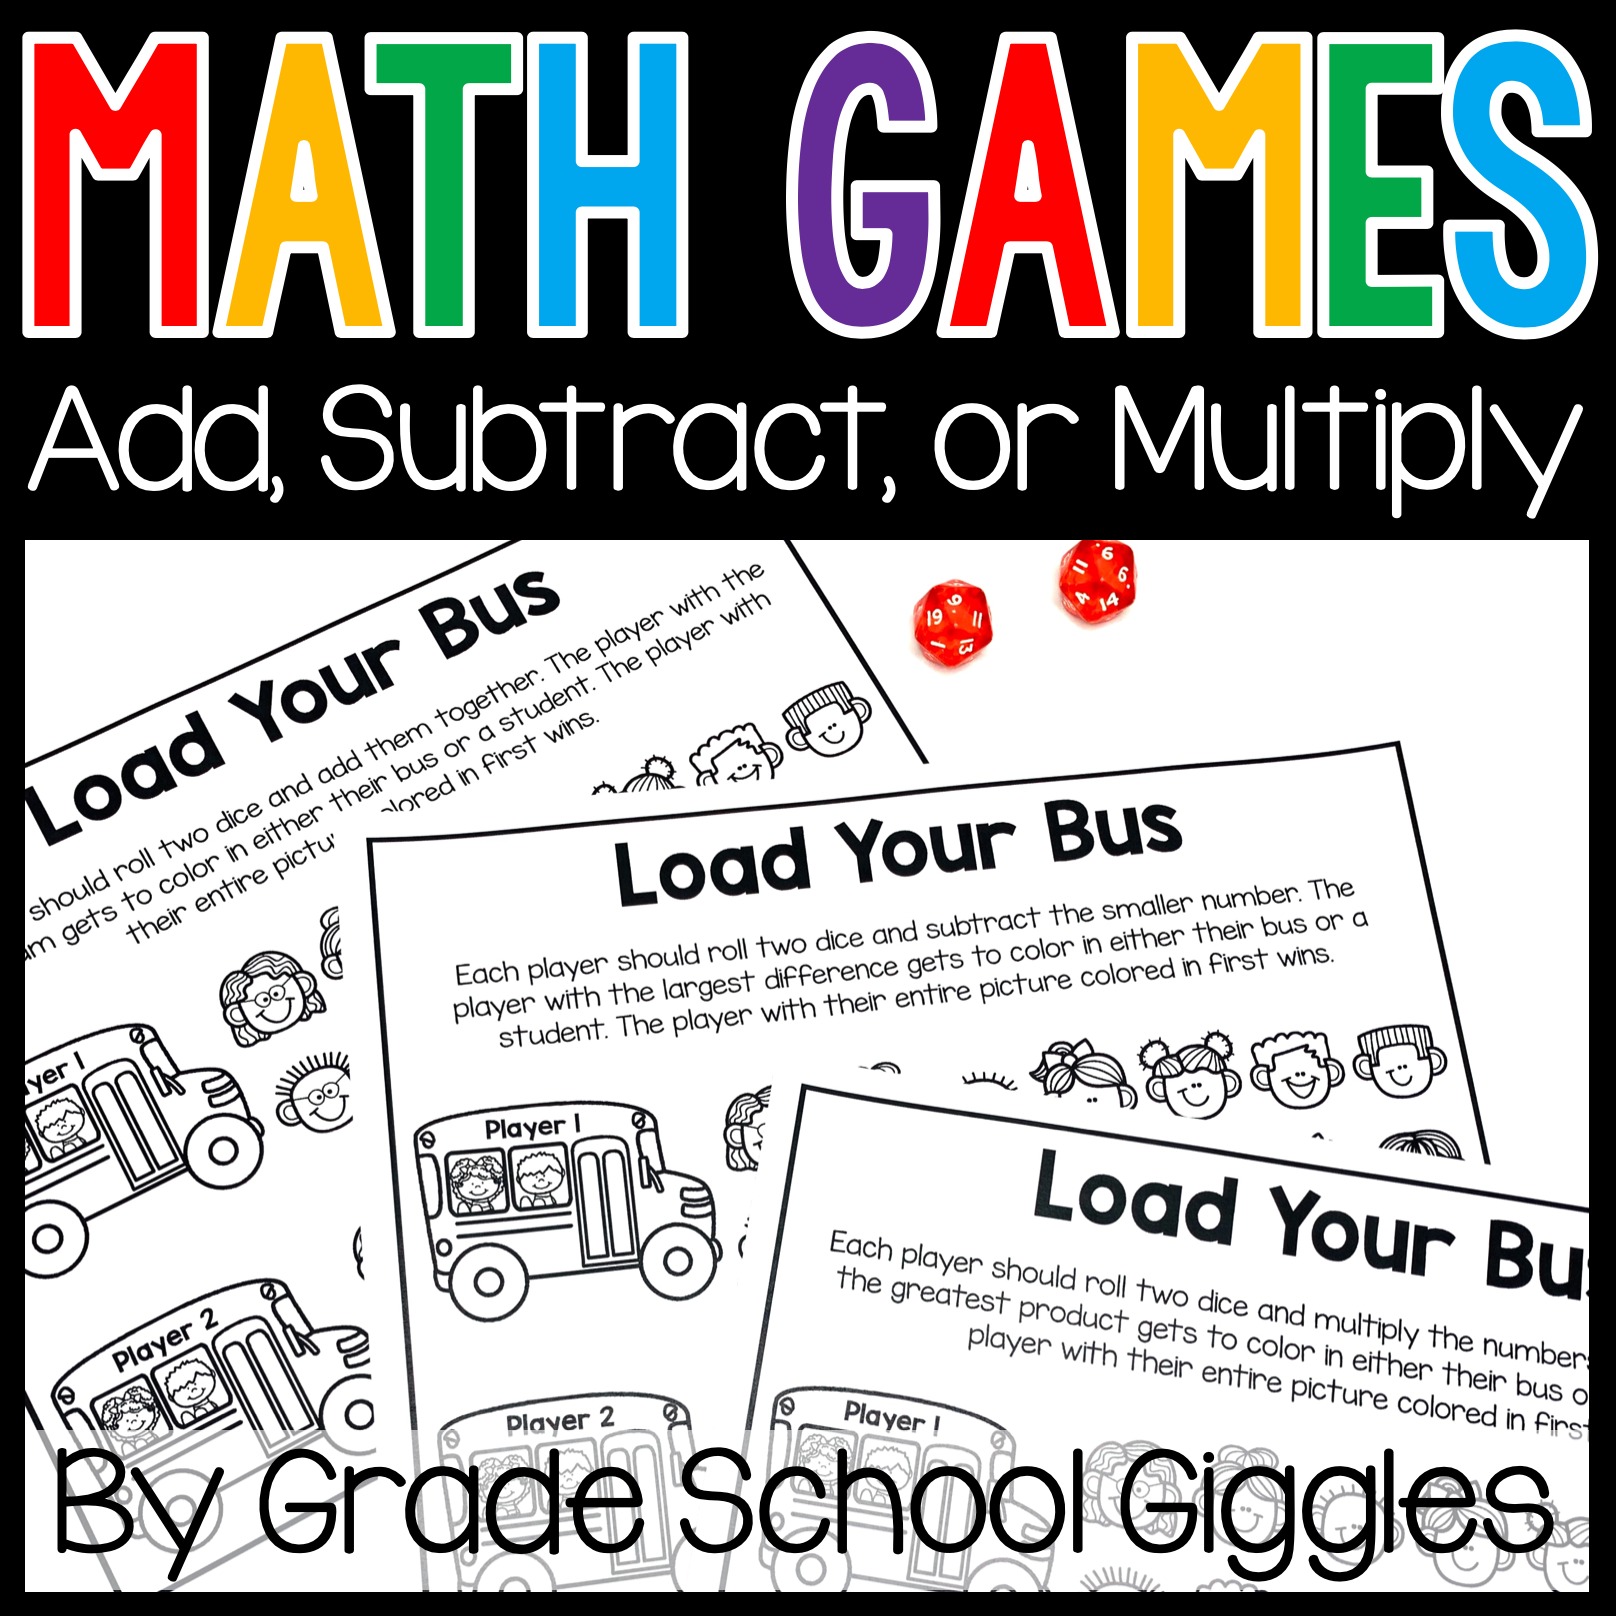 Printable no-prep math games for the whole year - addition, subtraction, and multiplication